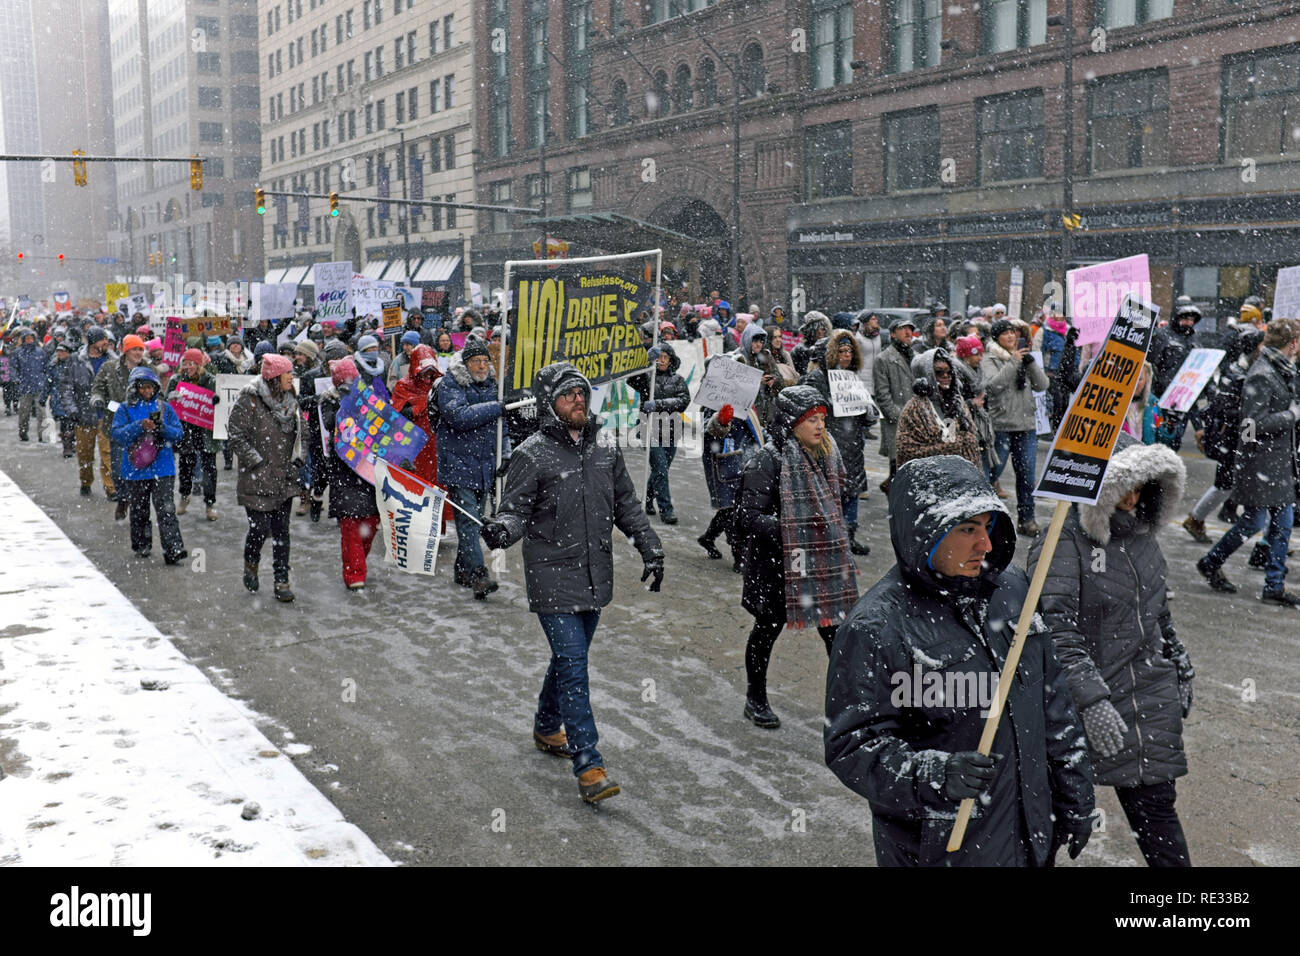 Cleveland, Ohio, USA, 19th January, 2019.  Participants in the 2019 Women's March in downtown Cleveland, Ohio, USA make their way down Superior Avenue during the first major winter storm of the season.  Credit: Mark Kanning/Alamy Live News. Stock Photo